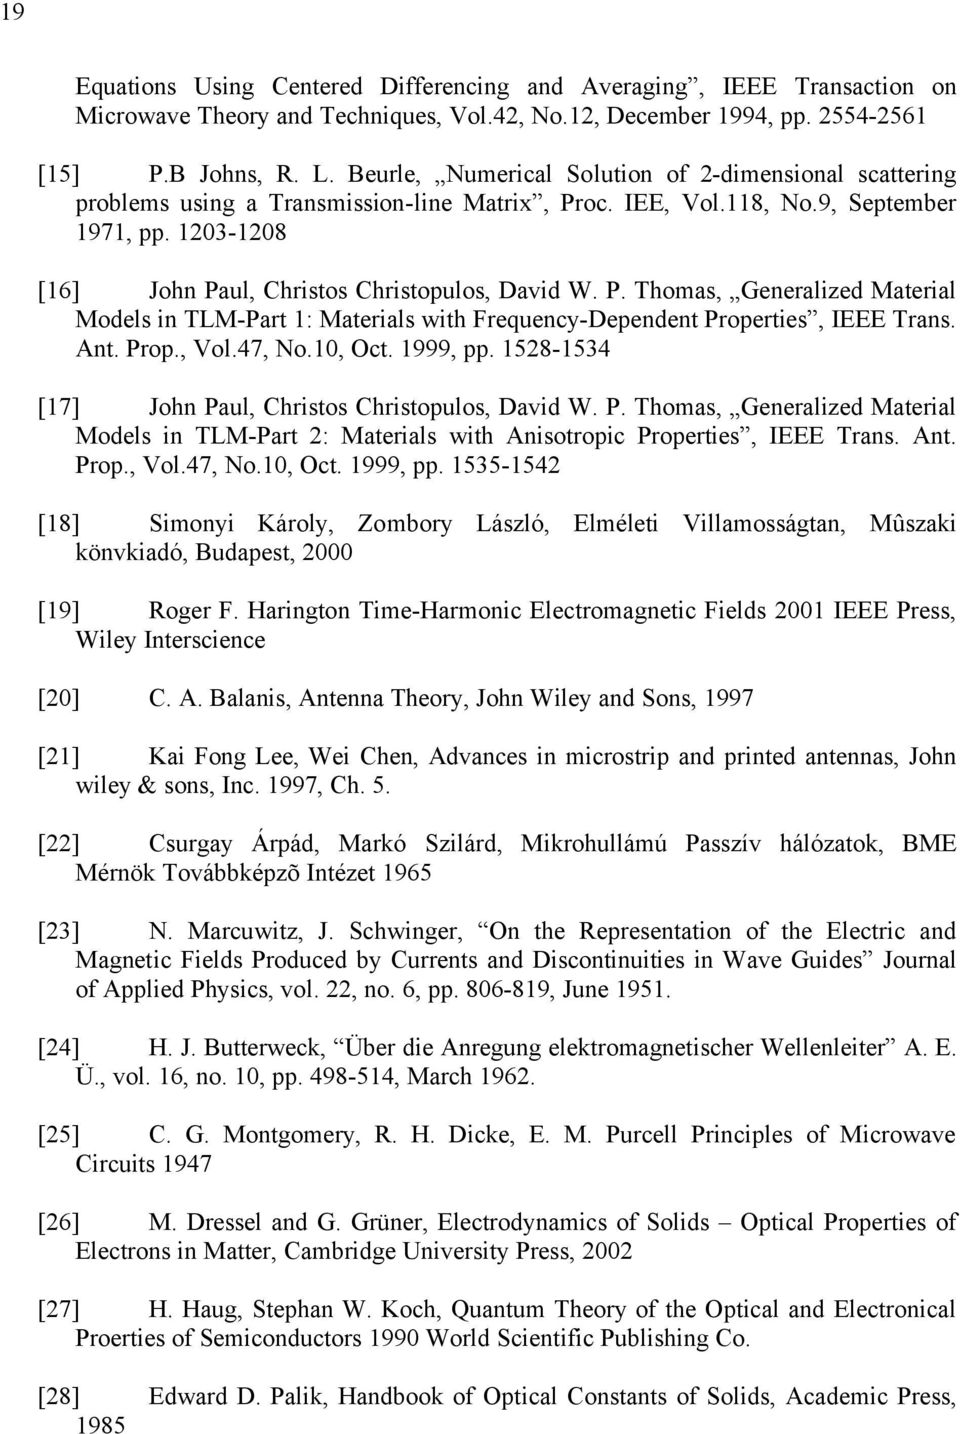 Ant. Prop., Vol.47, No.10, Oct. 1999, pp. 1528-1534 [17] John Paul, Chrstos Chrstopulos, Davd W. P. Thomas, Generalzed Materal Models n TLM-Part 2: Materals wth Ansotropc Propertes, IEEE Trans. Ant.